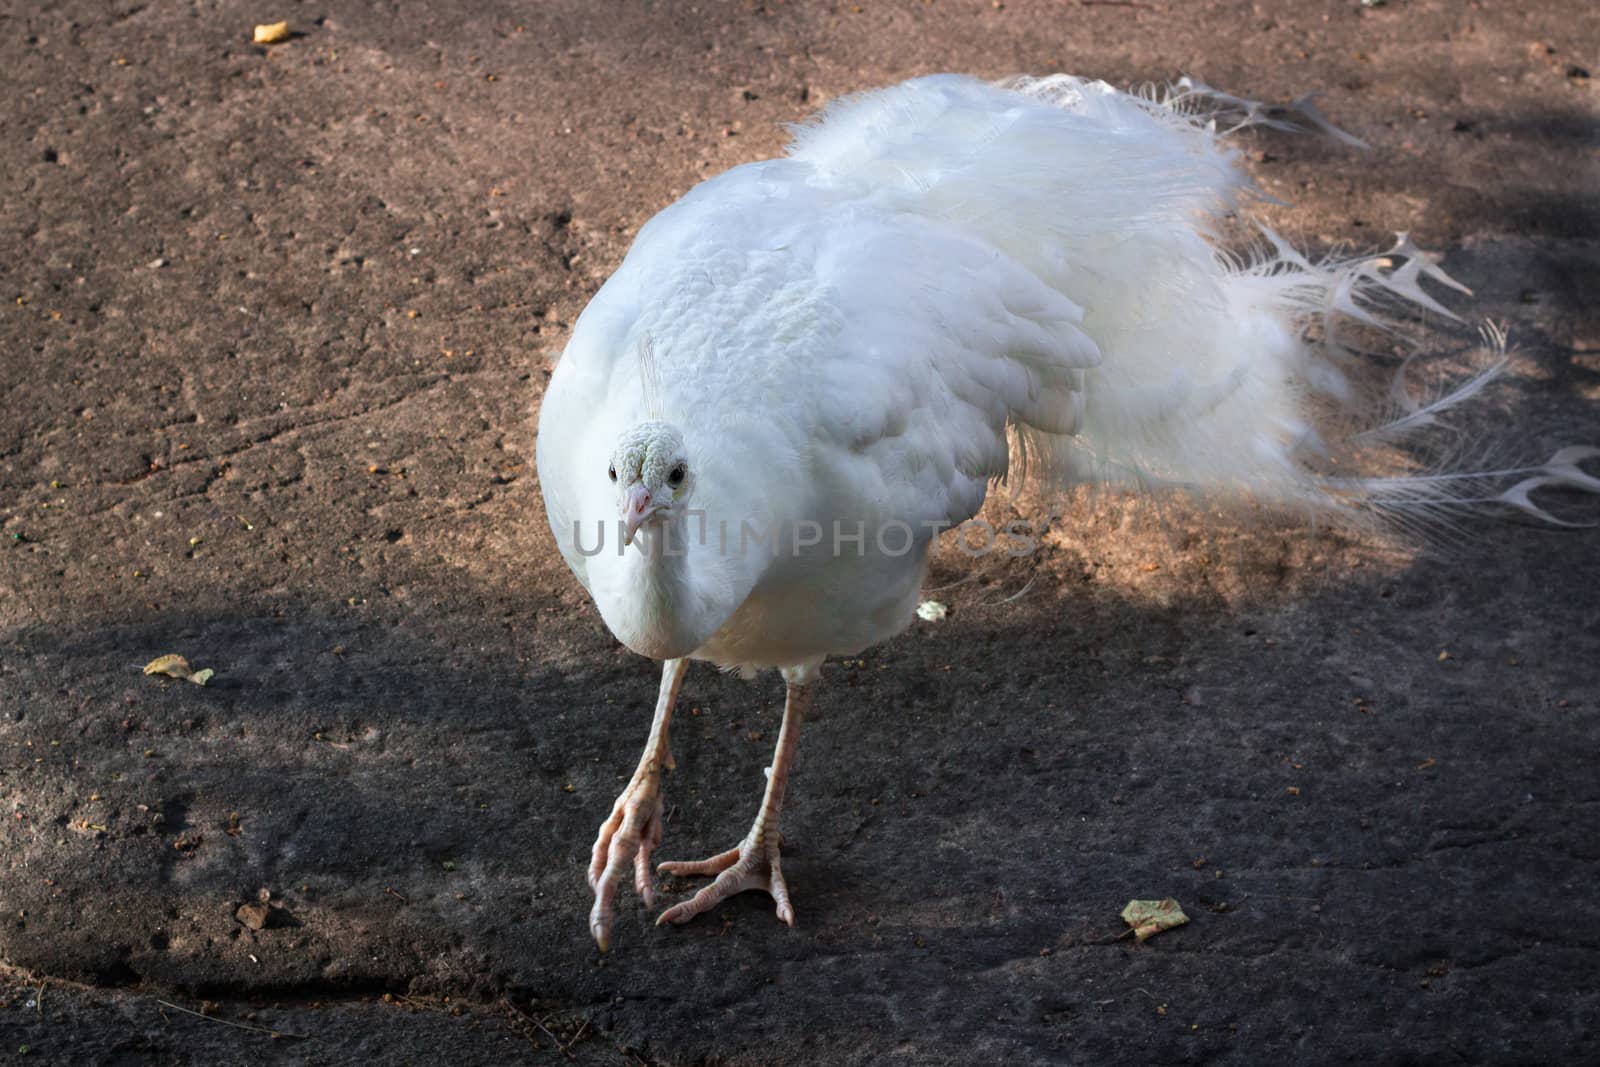 Snow-white bird peafowl peahen with crown runs on ground in zoo